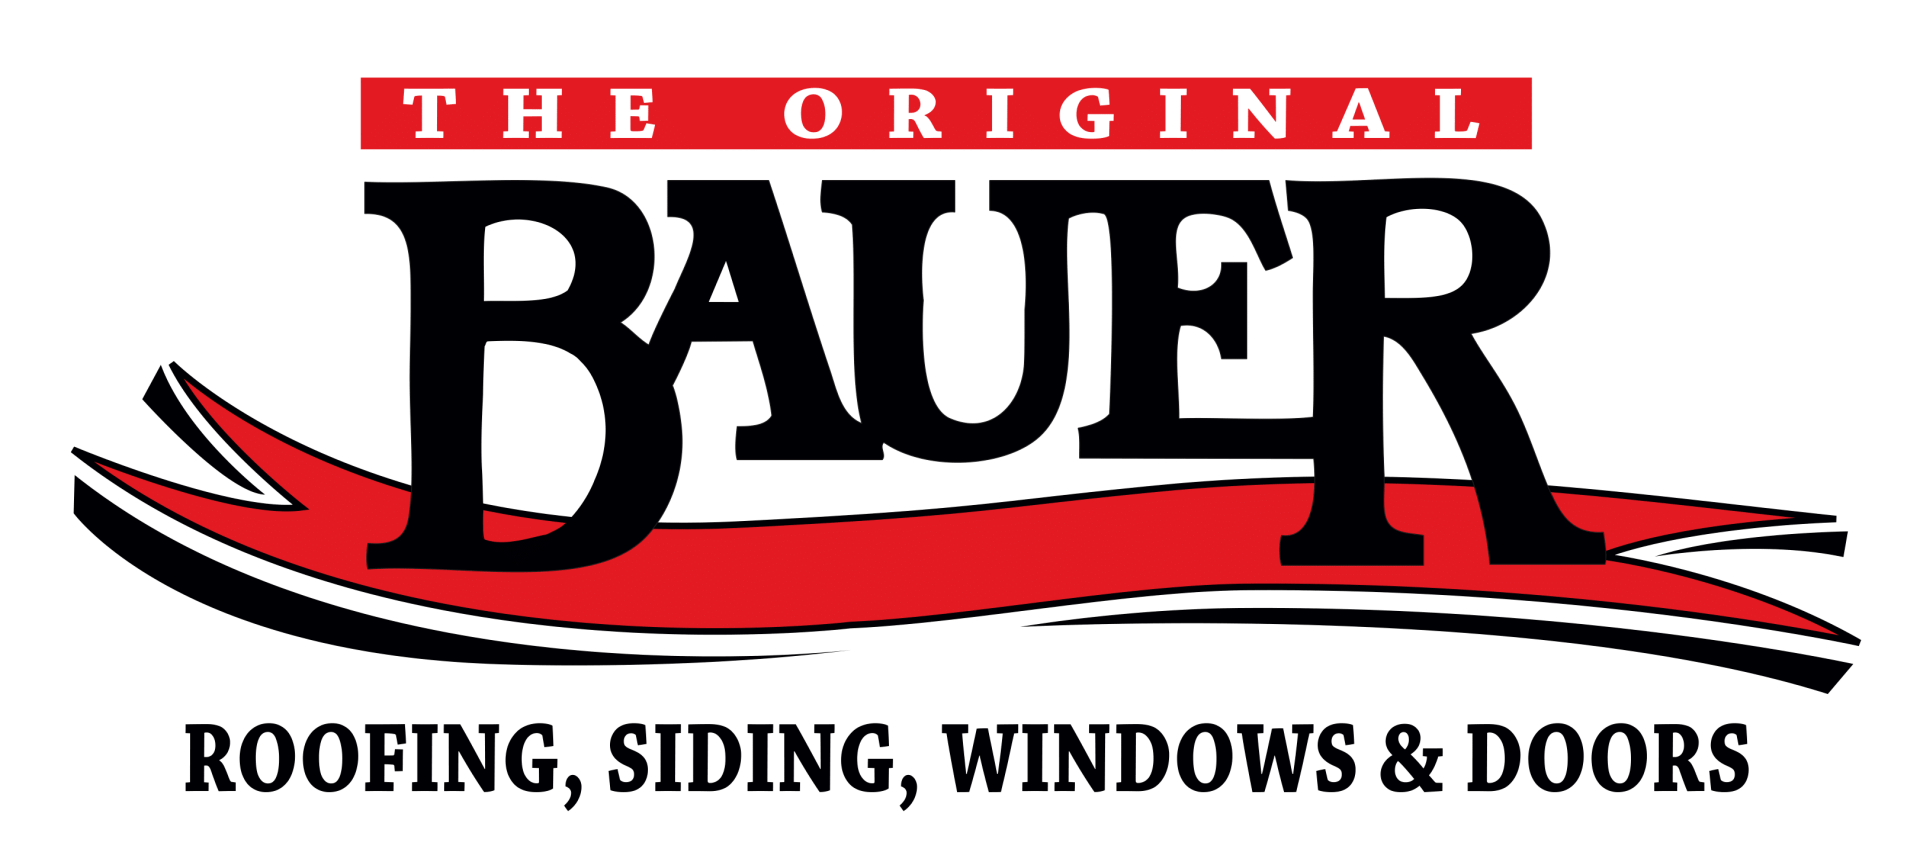 Bauer Roofing, Siding, Windows and Doors